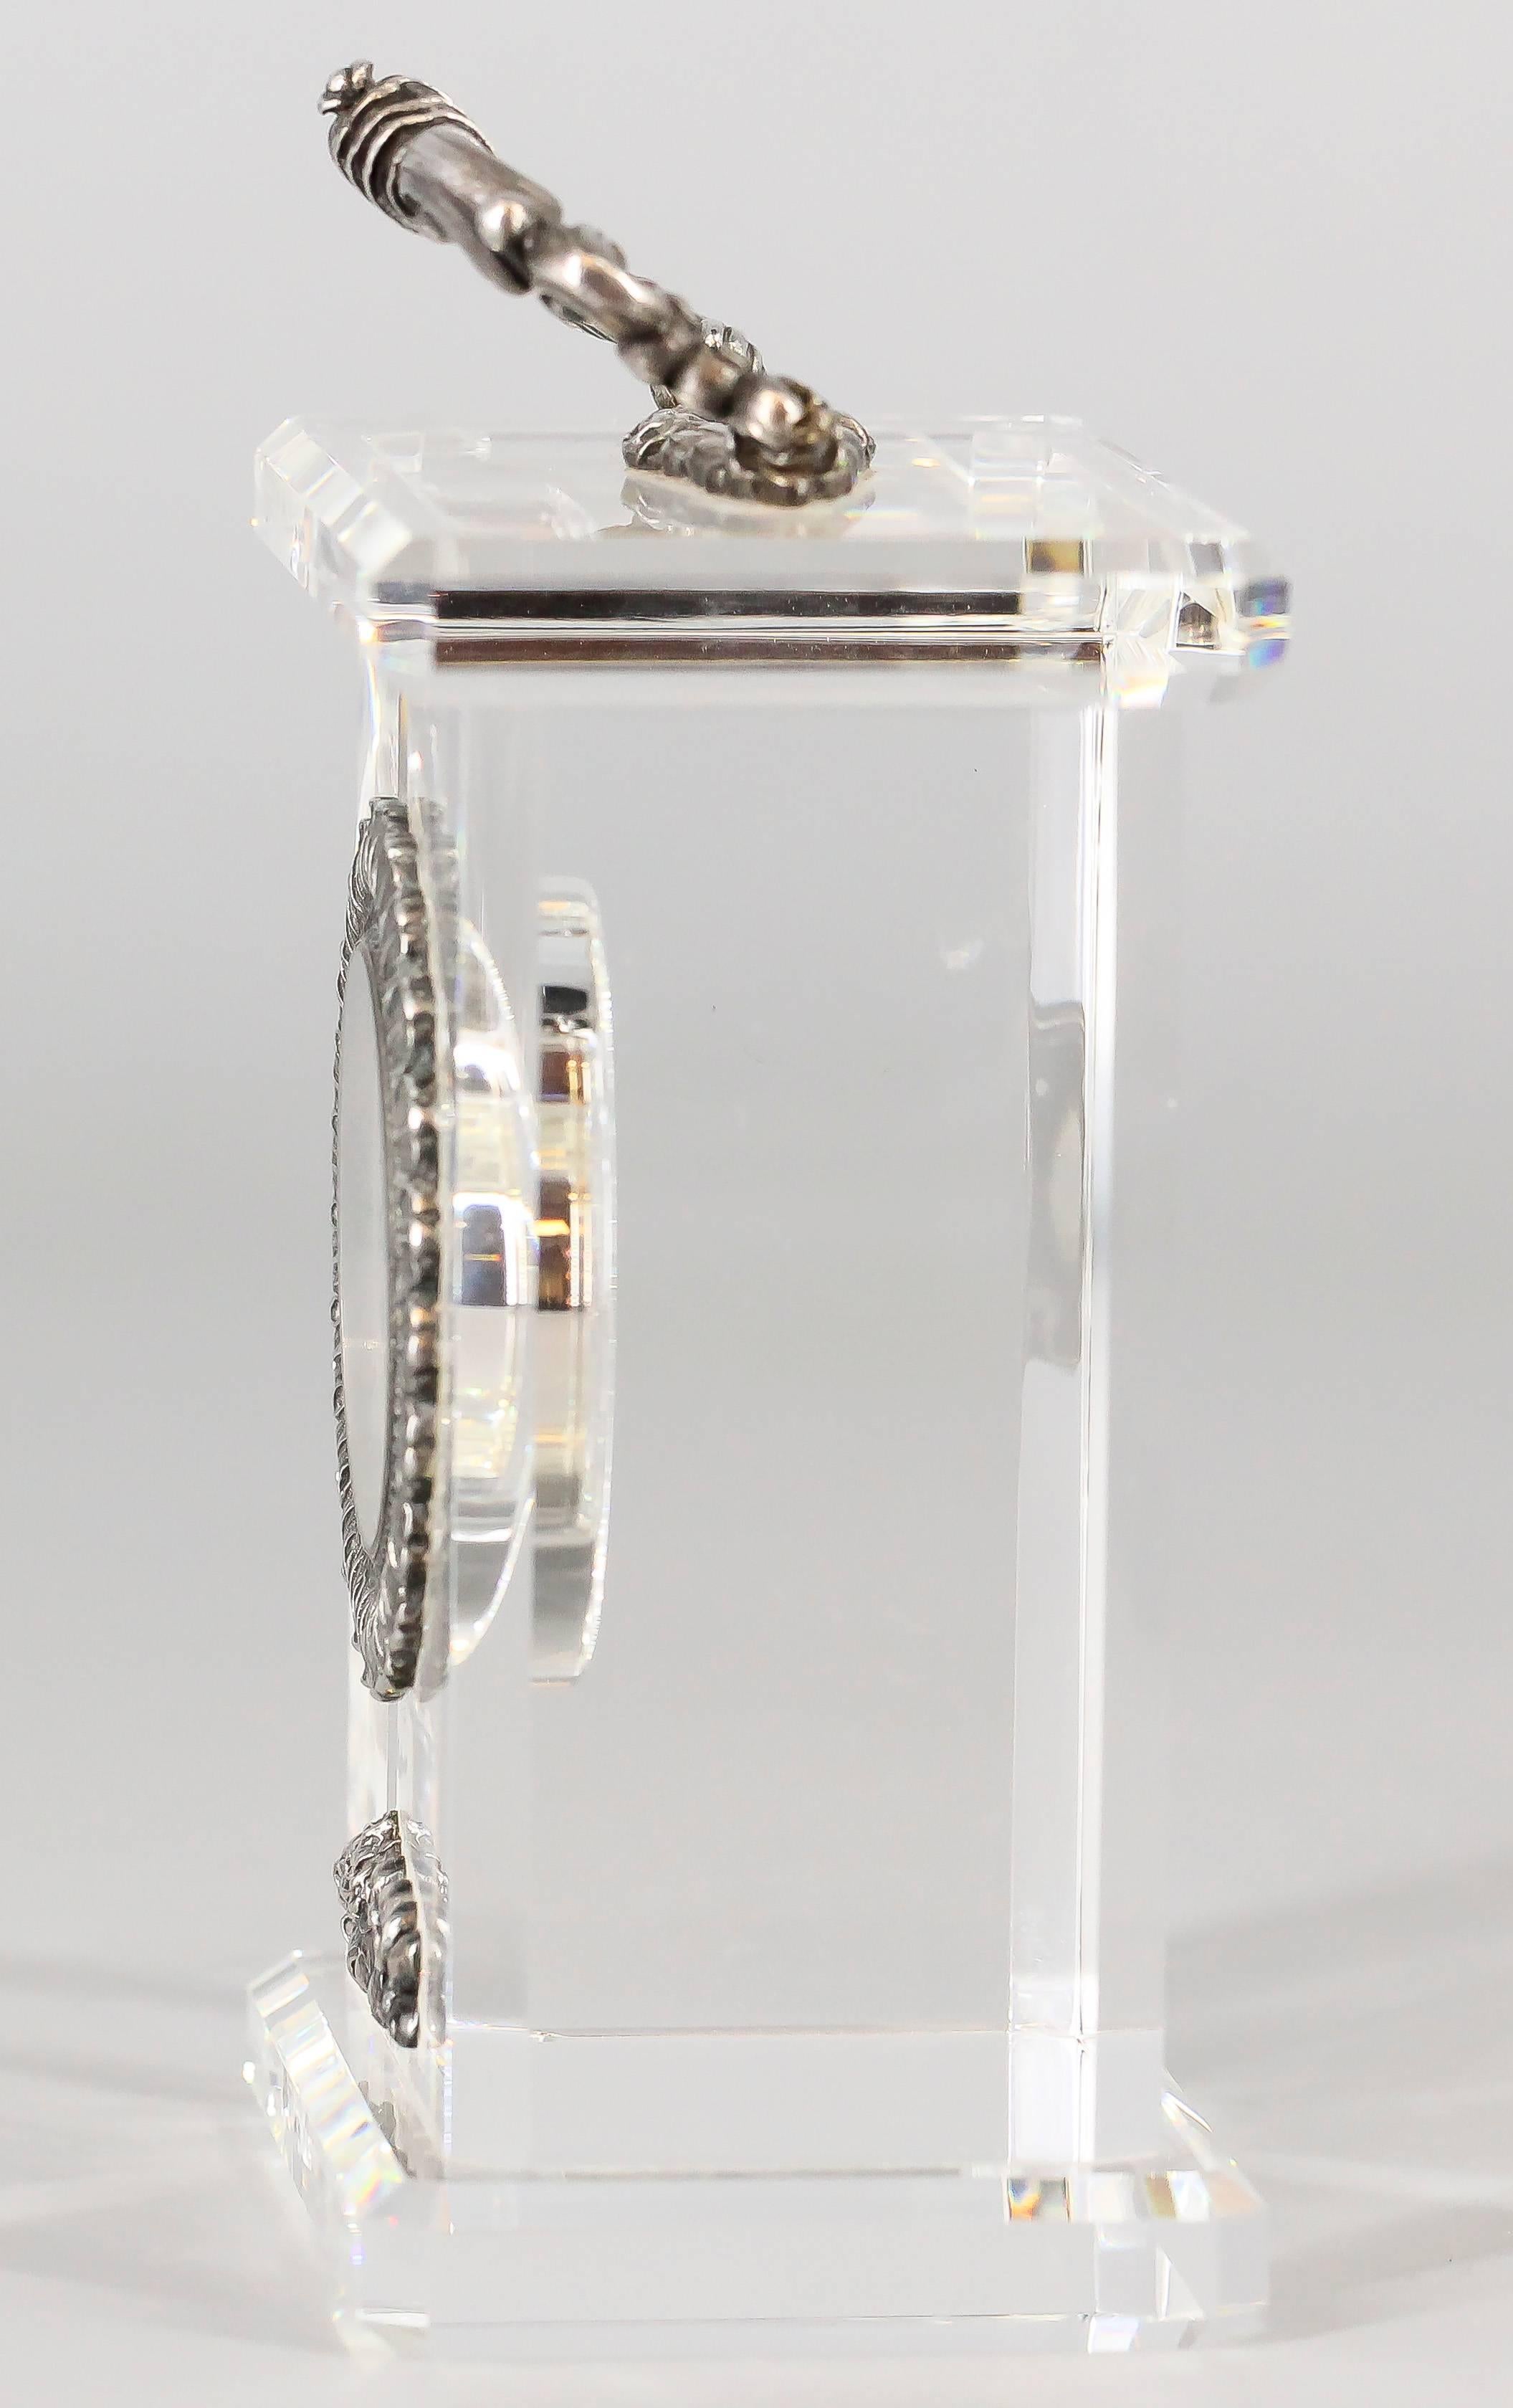 Gorgeous sterling silver and rock crystal limited edition desk clock by Buccellati. It features a beautiful design comprised of clear rock crystal with sterling silver handle bar and accents, as well as the bezel on the clock.  The clock features a